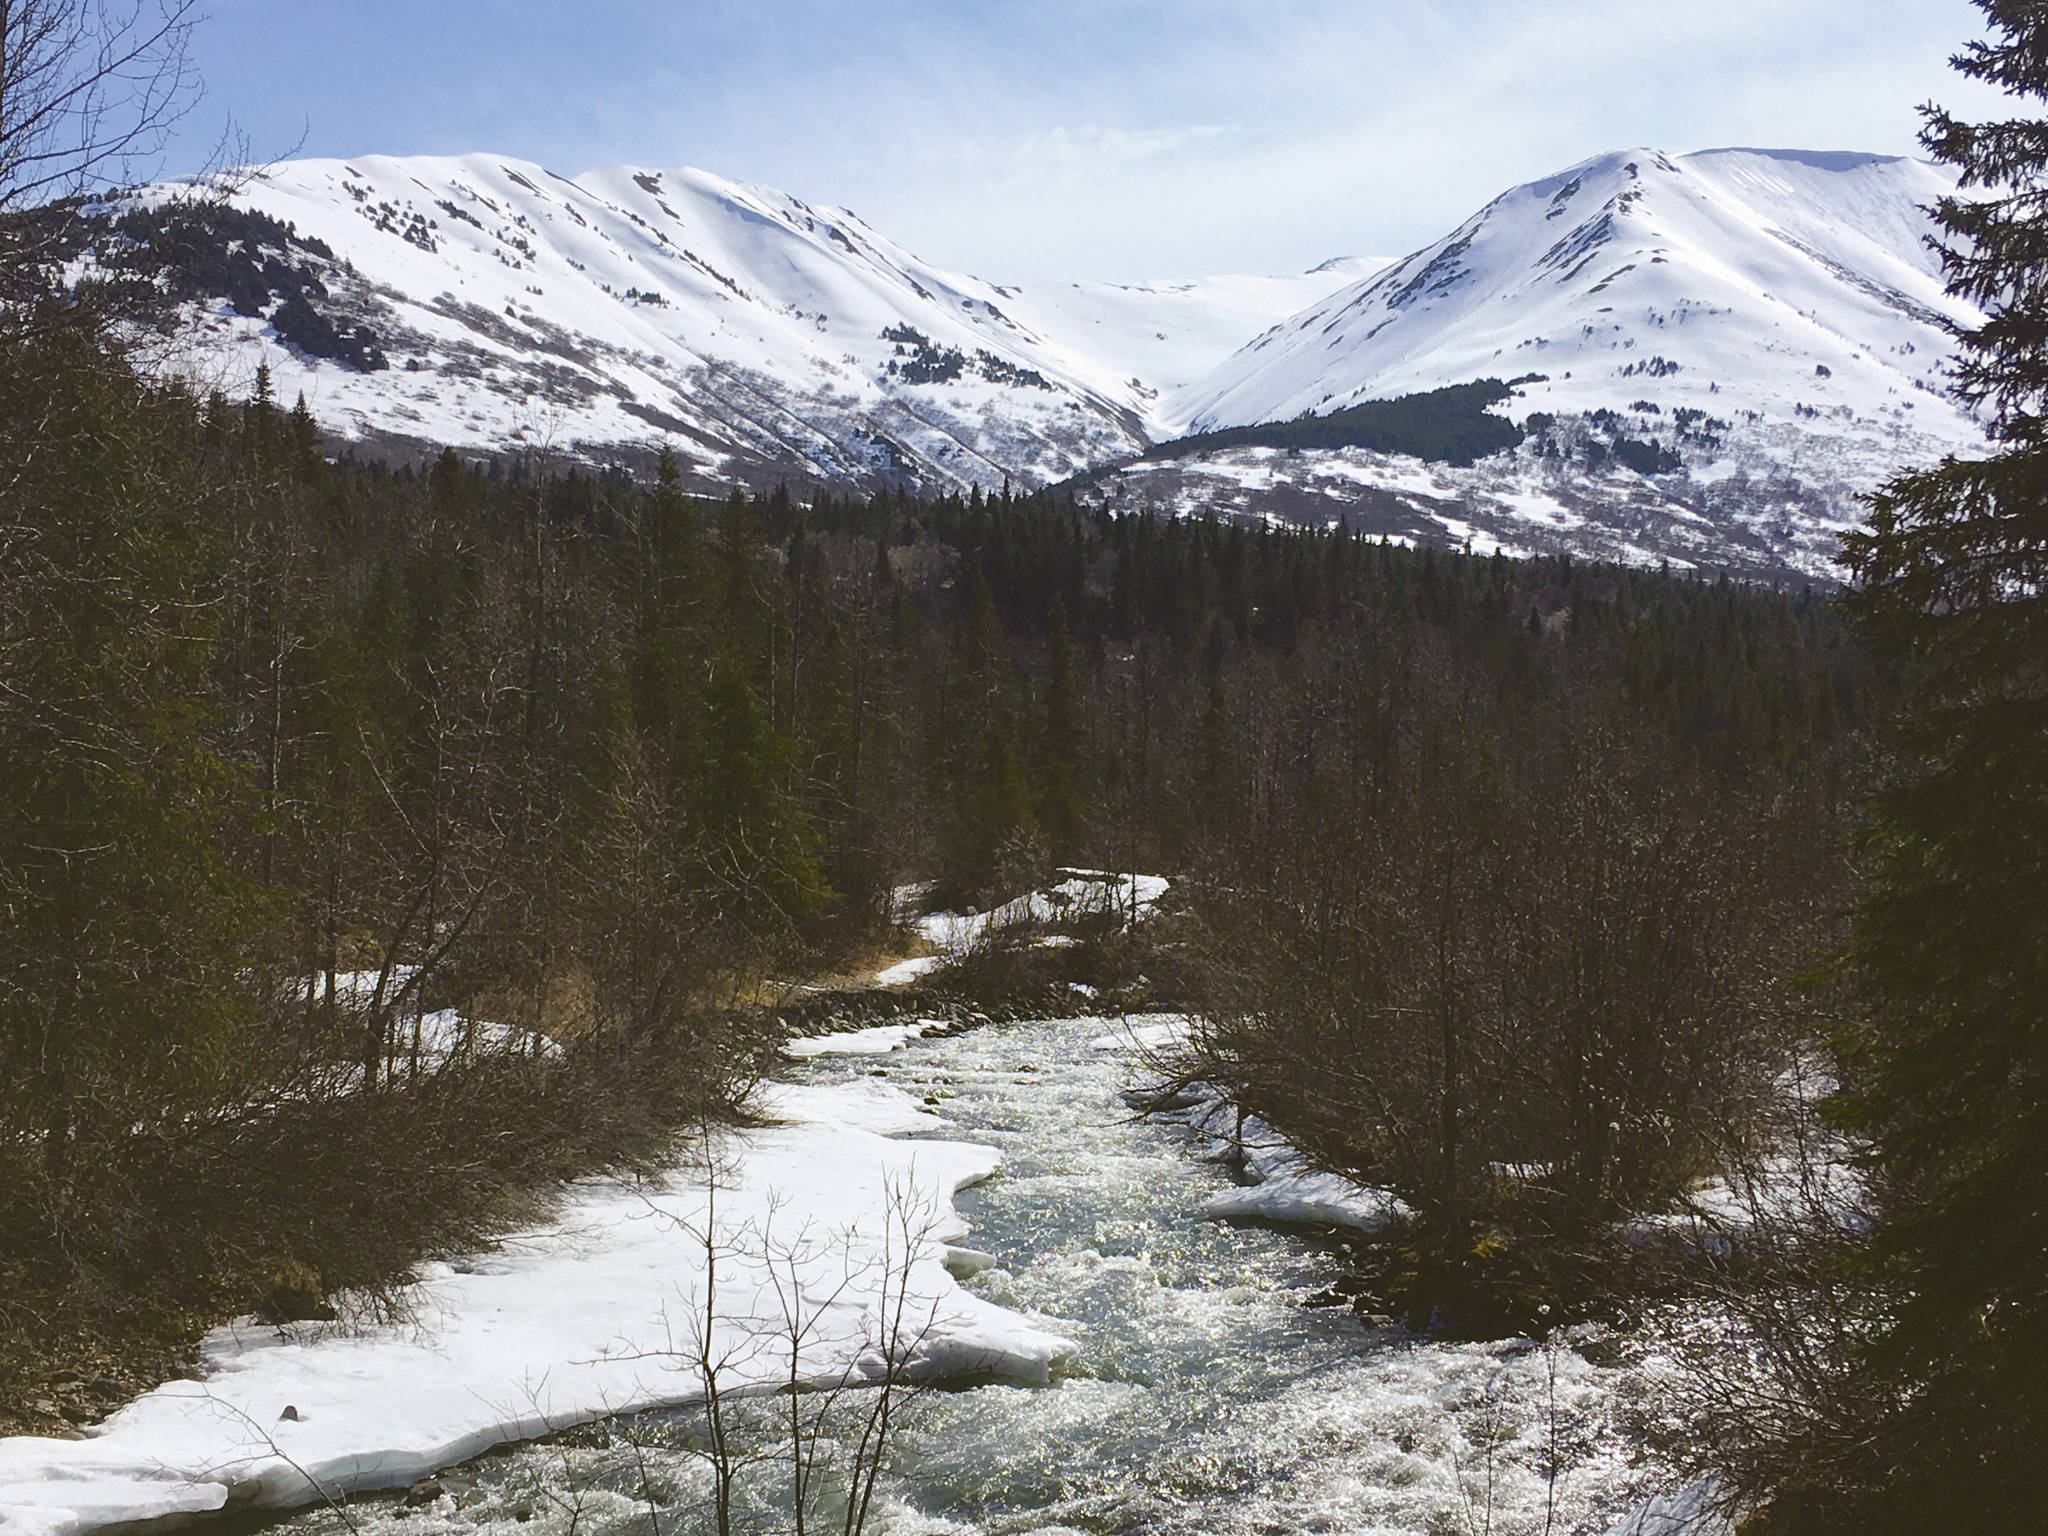 Mills Creek on April 29, 2020 in the pass between Cooper Landing and the Turnagain Arm. (Photo by Jeff Helminiak)